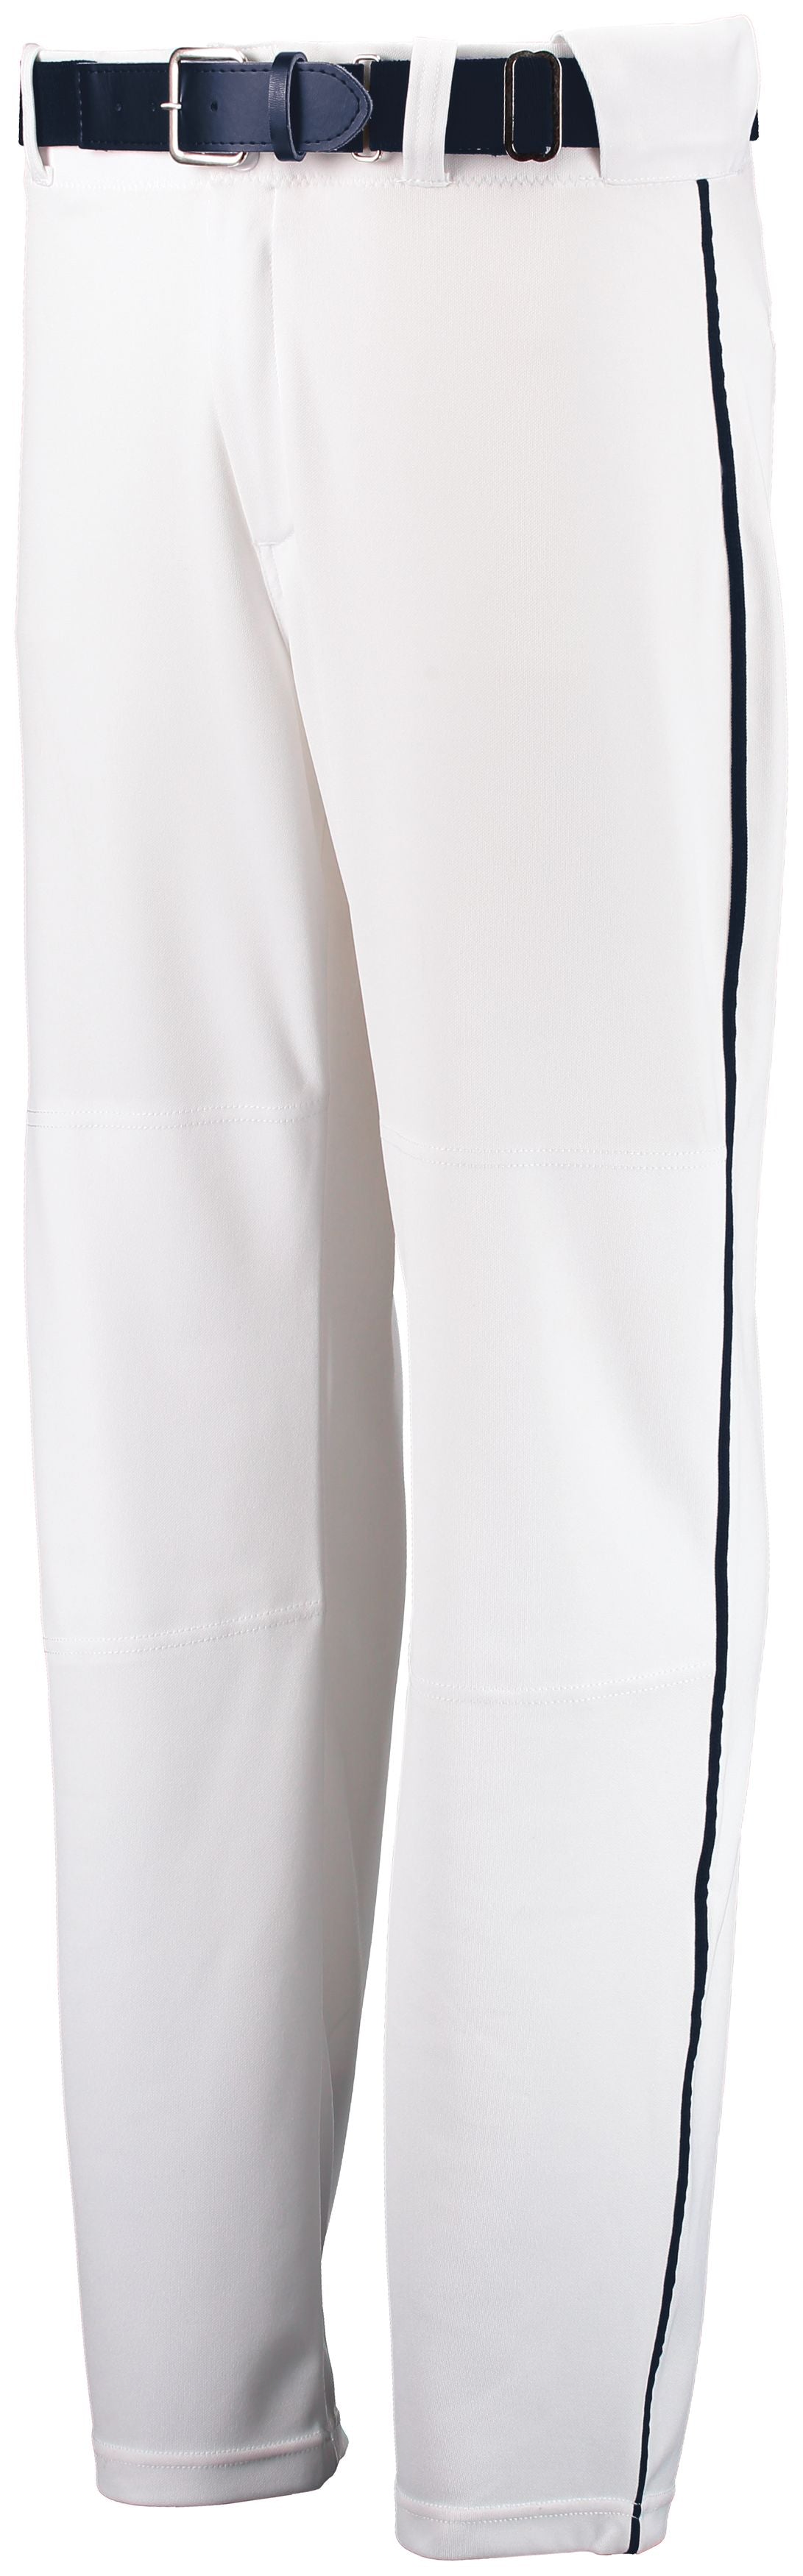 Russell Athletic Open Bottom Piped Pant in White/Navy  -Part of the Adult, Adult-Pants, Pants, Baseball, Russell-Athletic-Products, All-Sports, All-Sports-1 product lines at KanaleyCreations.com